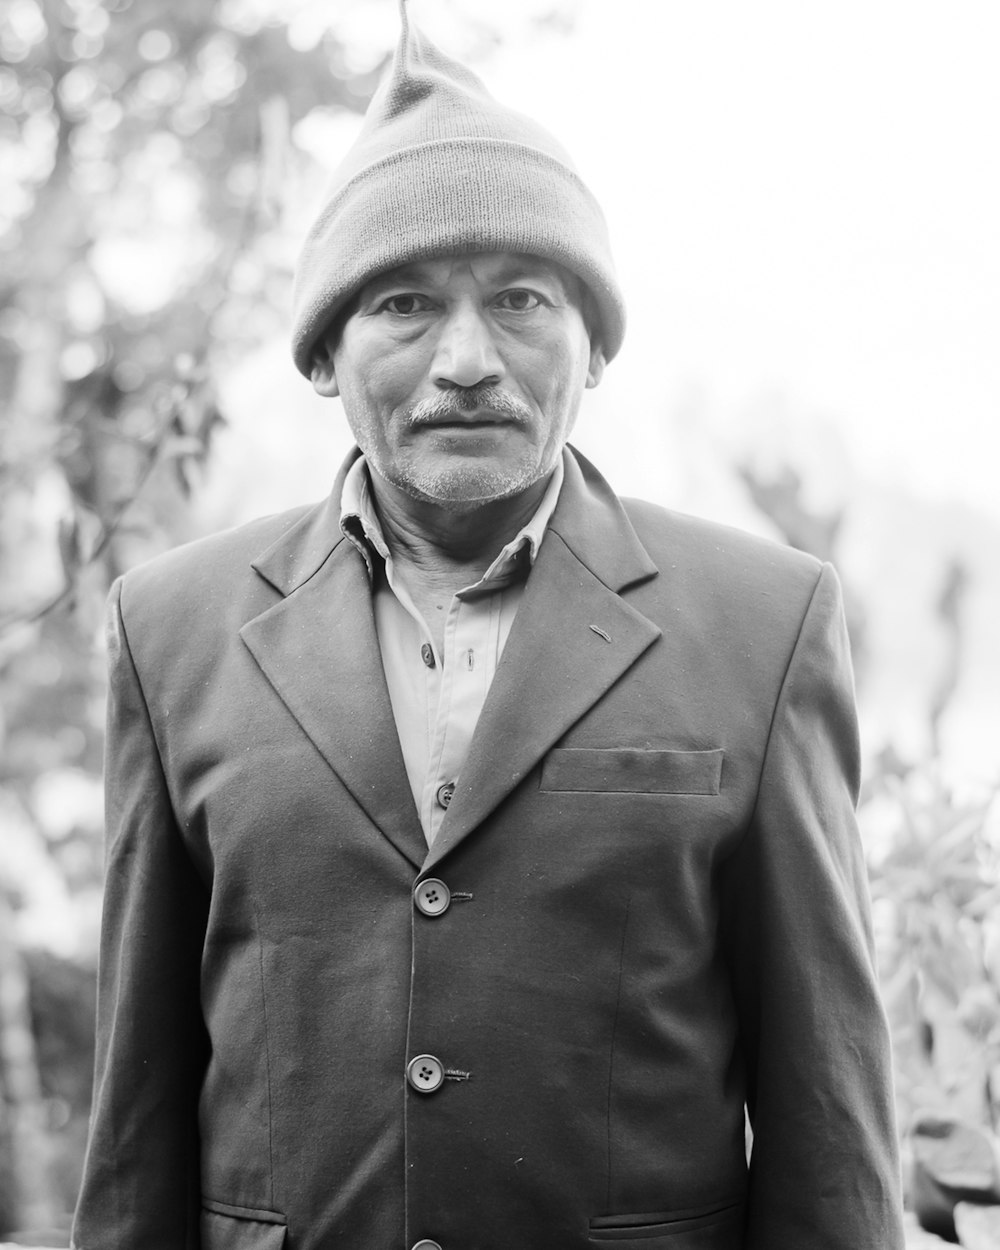 man in black suit jacket and knit cap in grayscale photography